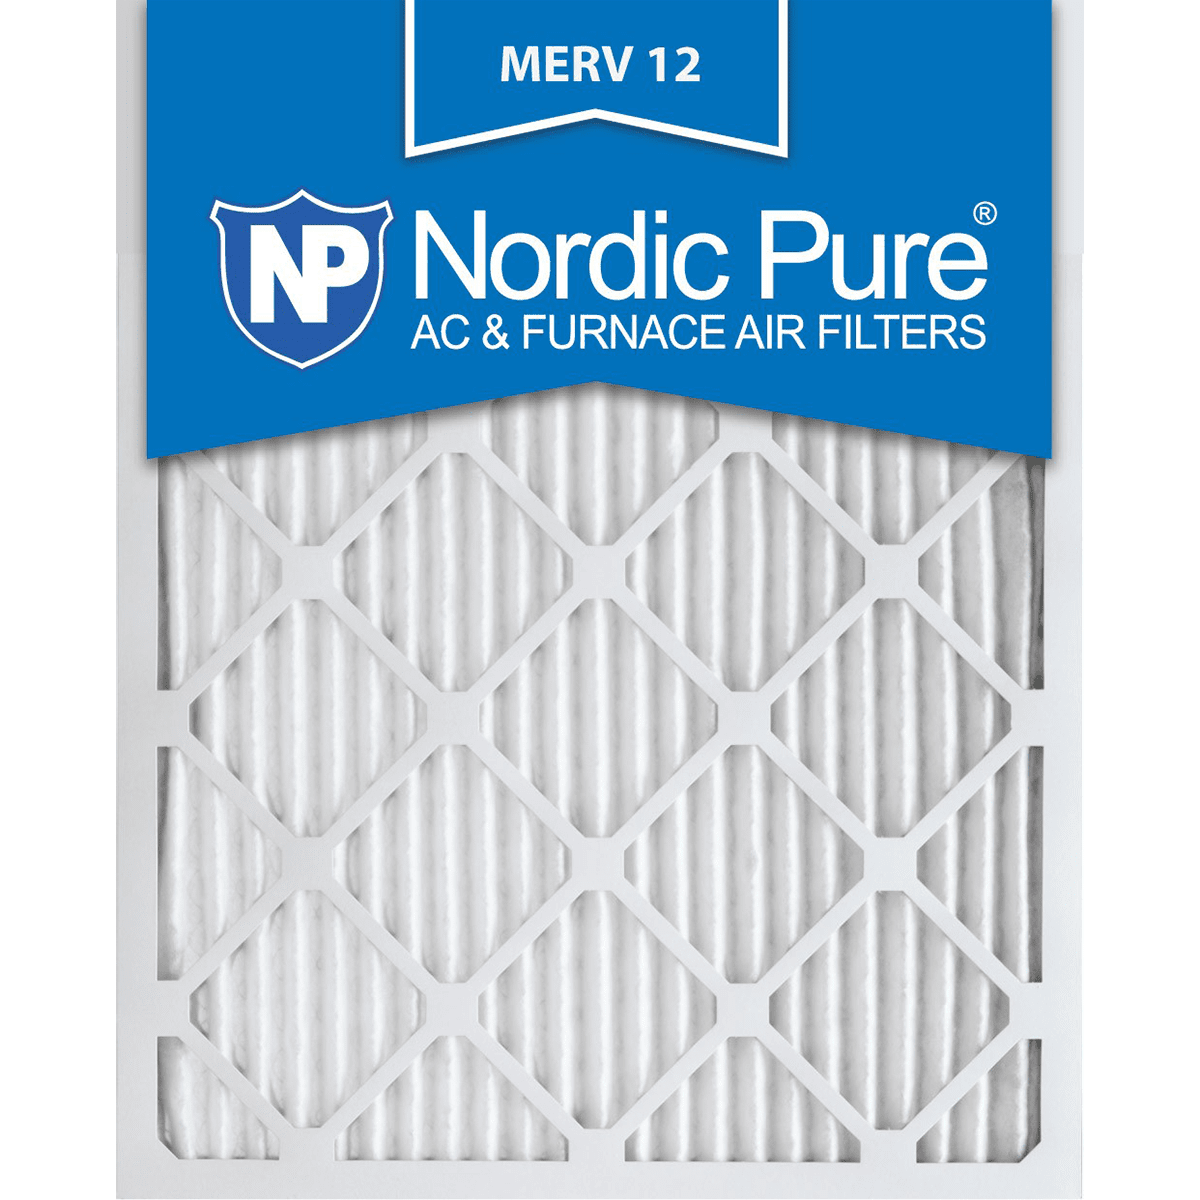 Nordic Pure Merv 12 Pleated Furnace Filter 20x25x1